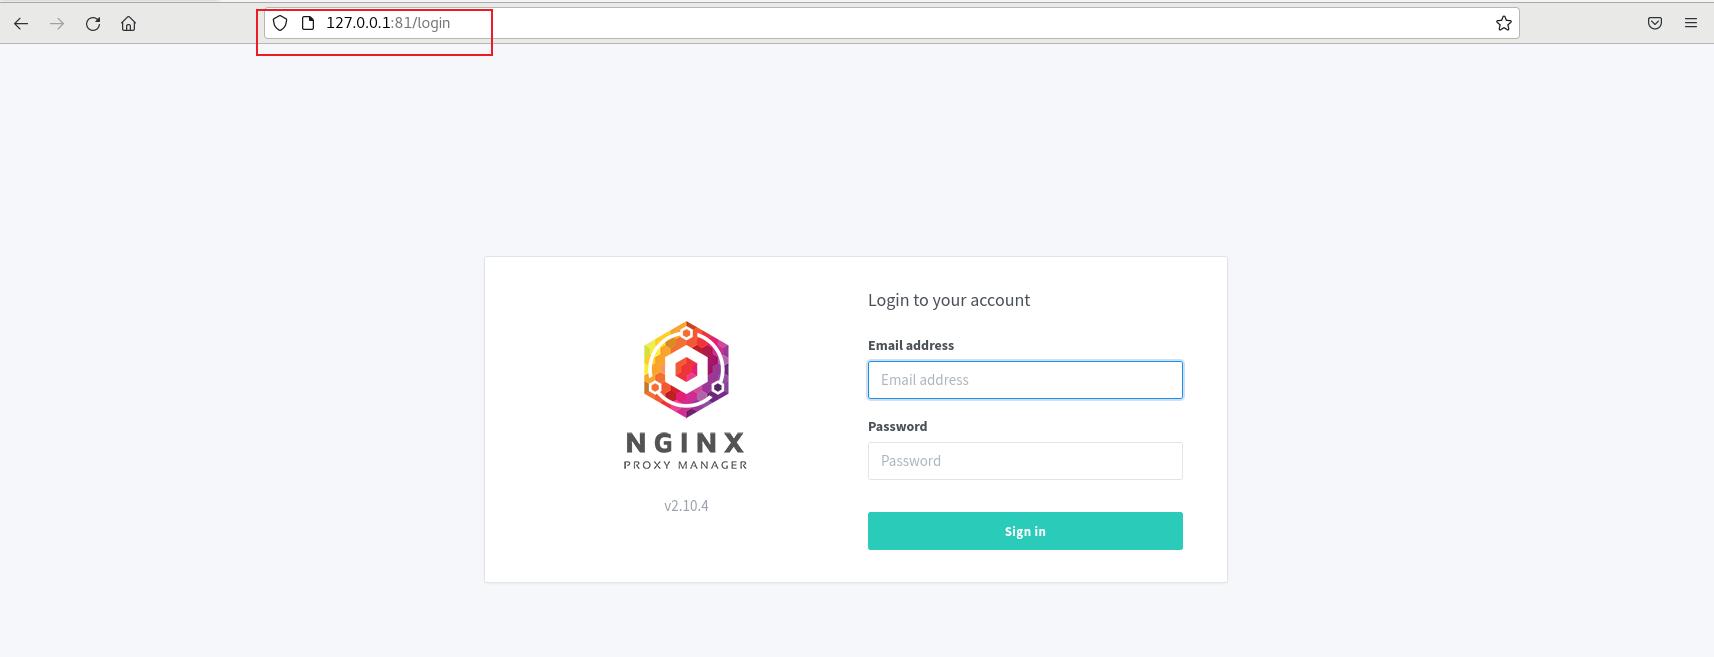 Nginx visual management tools and Cpolar to set up a server locally [Intranet Penetration]